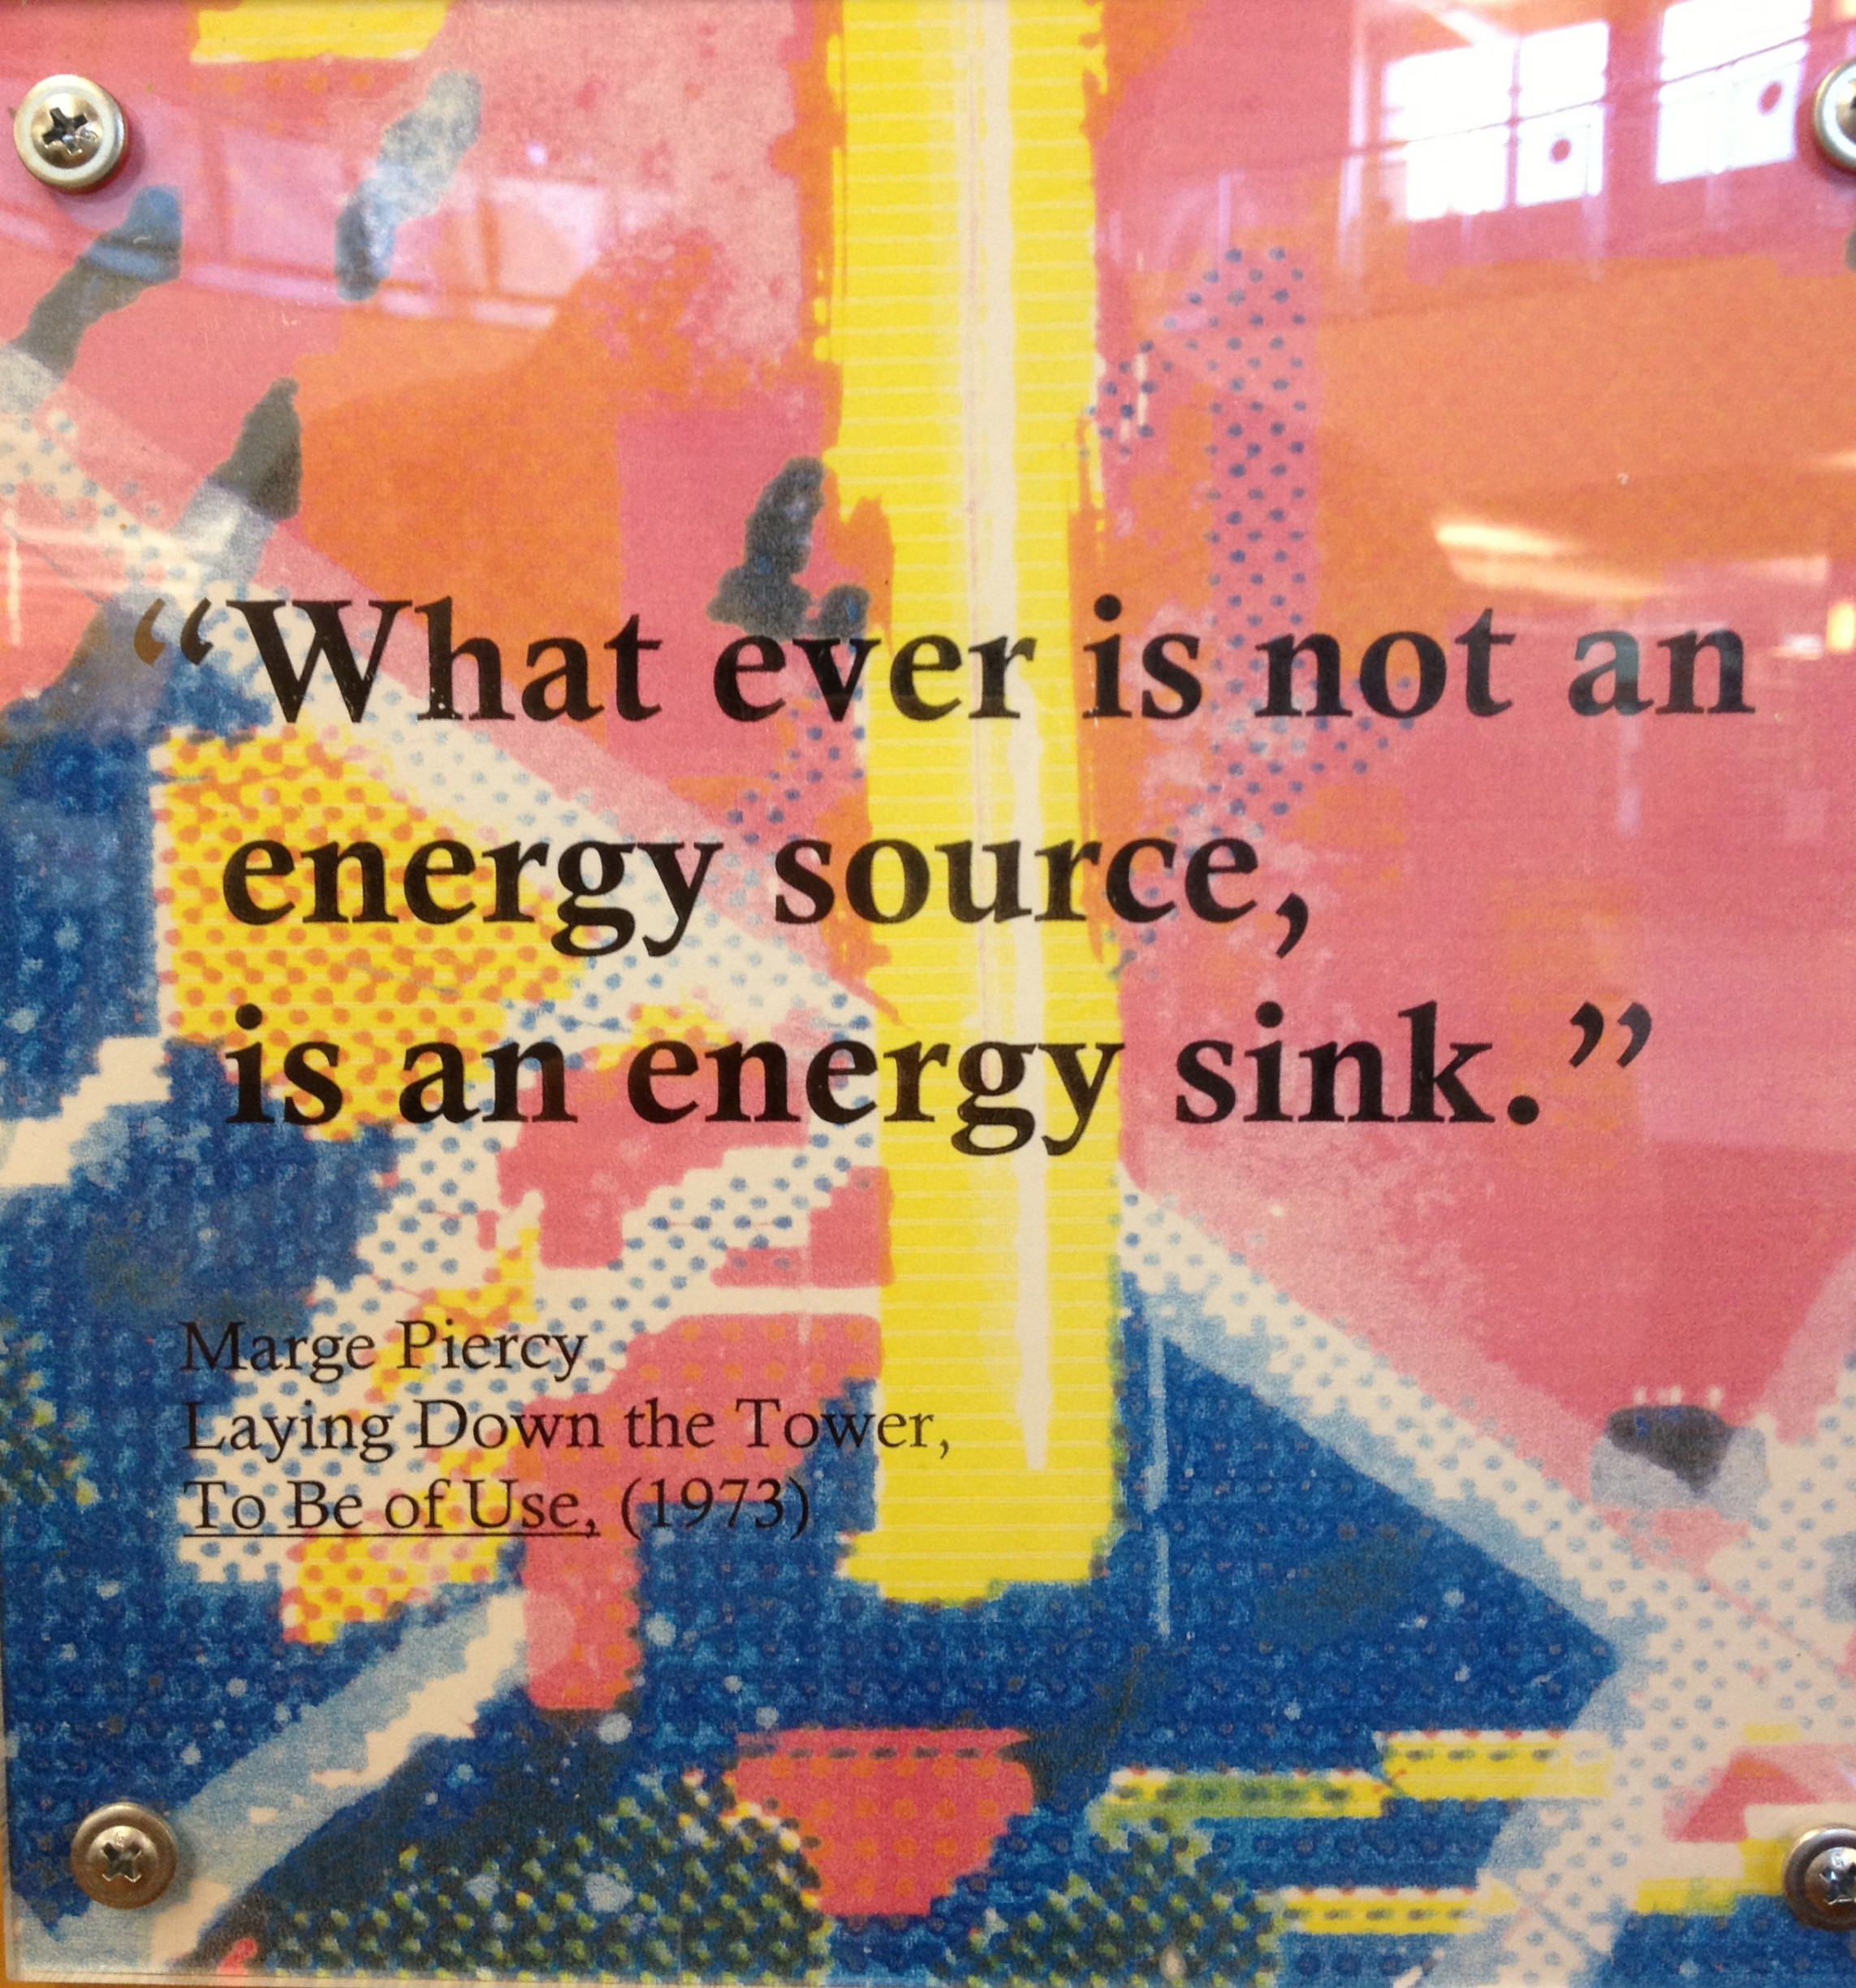 What ever is not an energy source, is an energy sink.